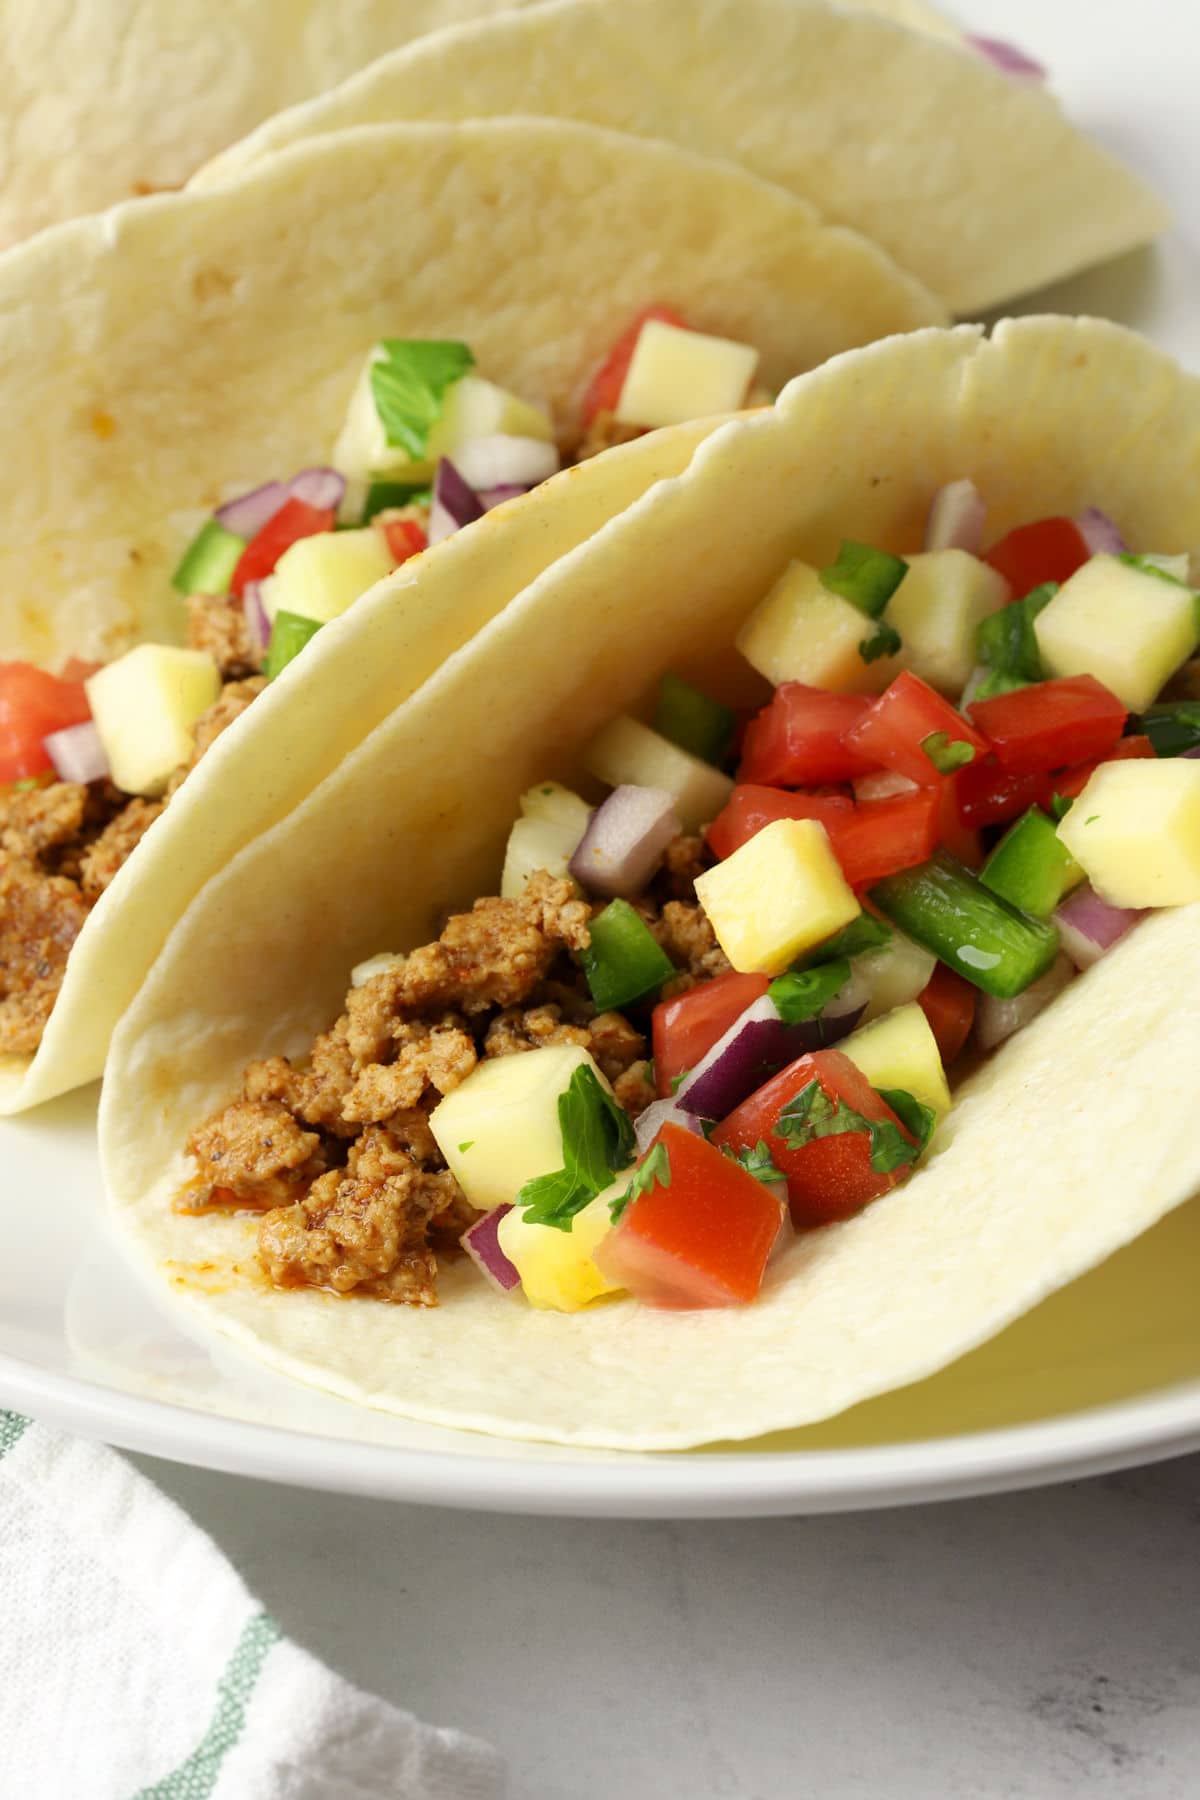 Spiced ground pork topped with pineapple pico de gallo in a tortilla.